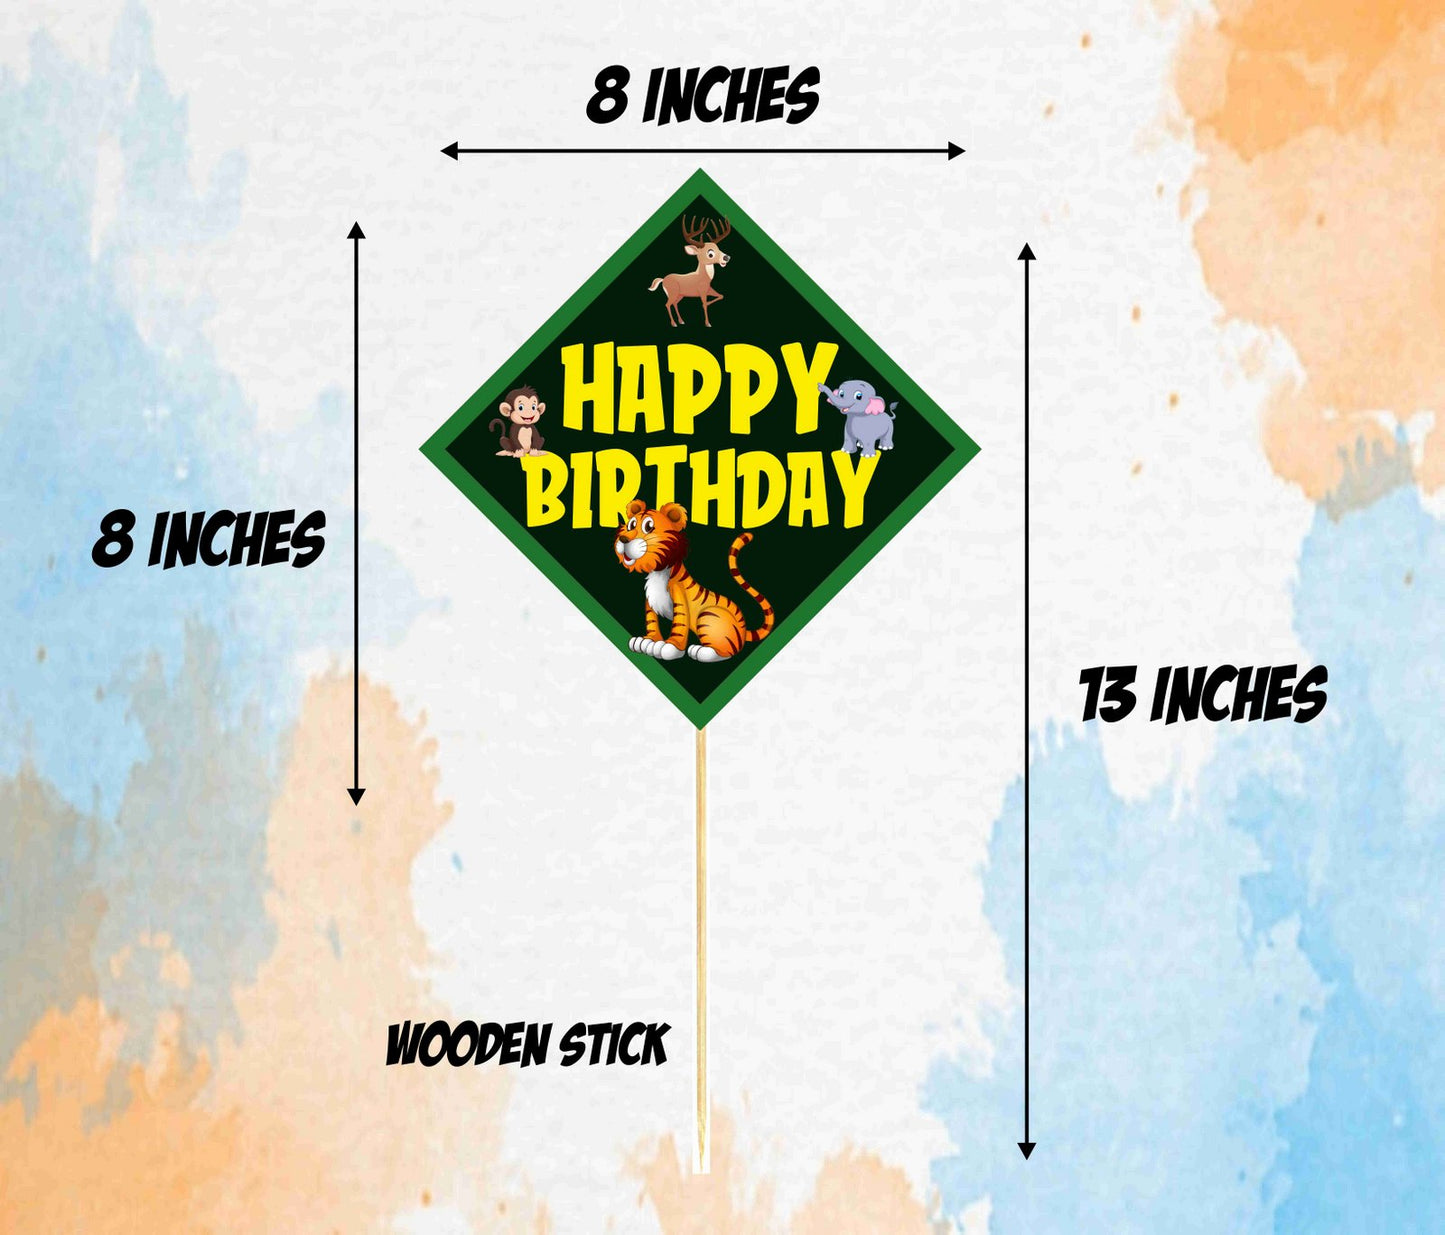 Jungle Theme Birthday Photo Booth Party Props Theme Birthday Party Decoration, Birthday Photo Booth Party Item for Adults and Kids